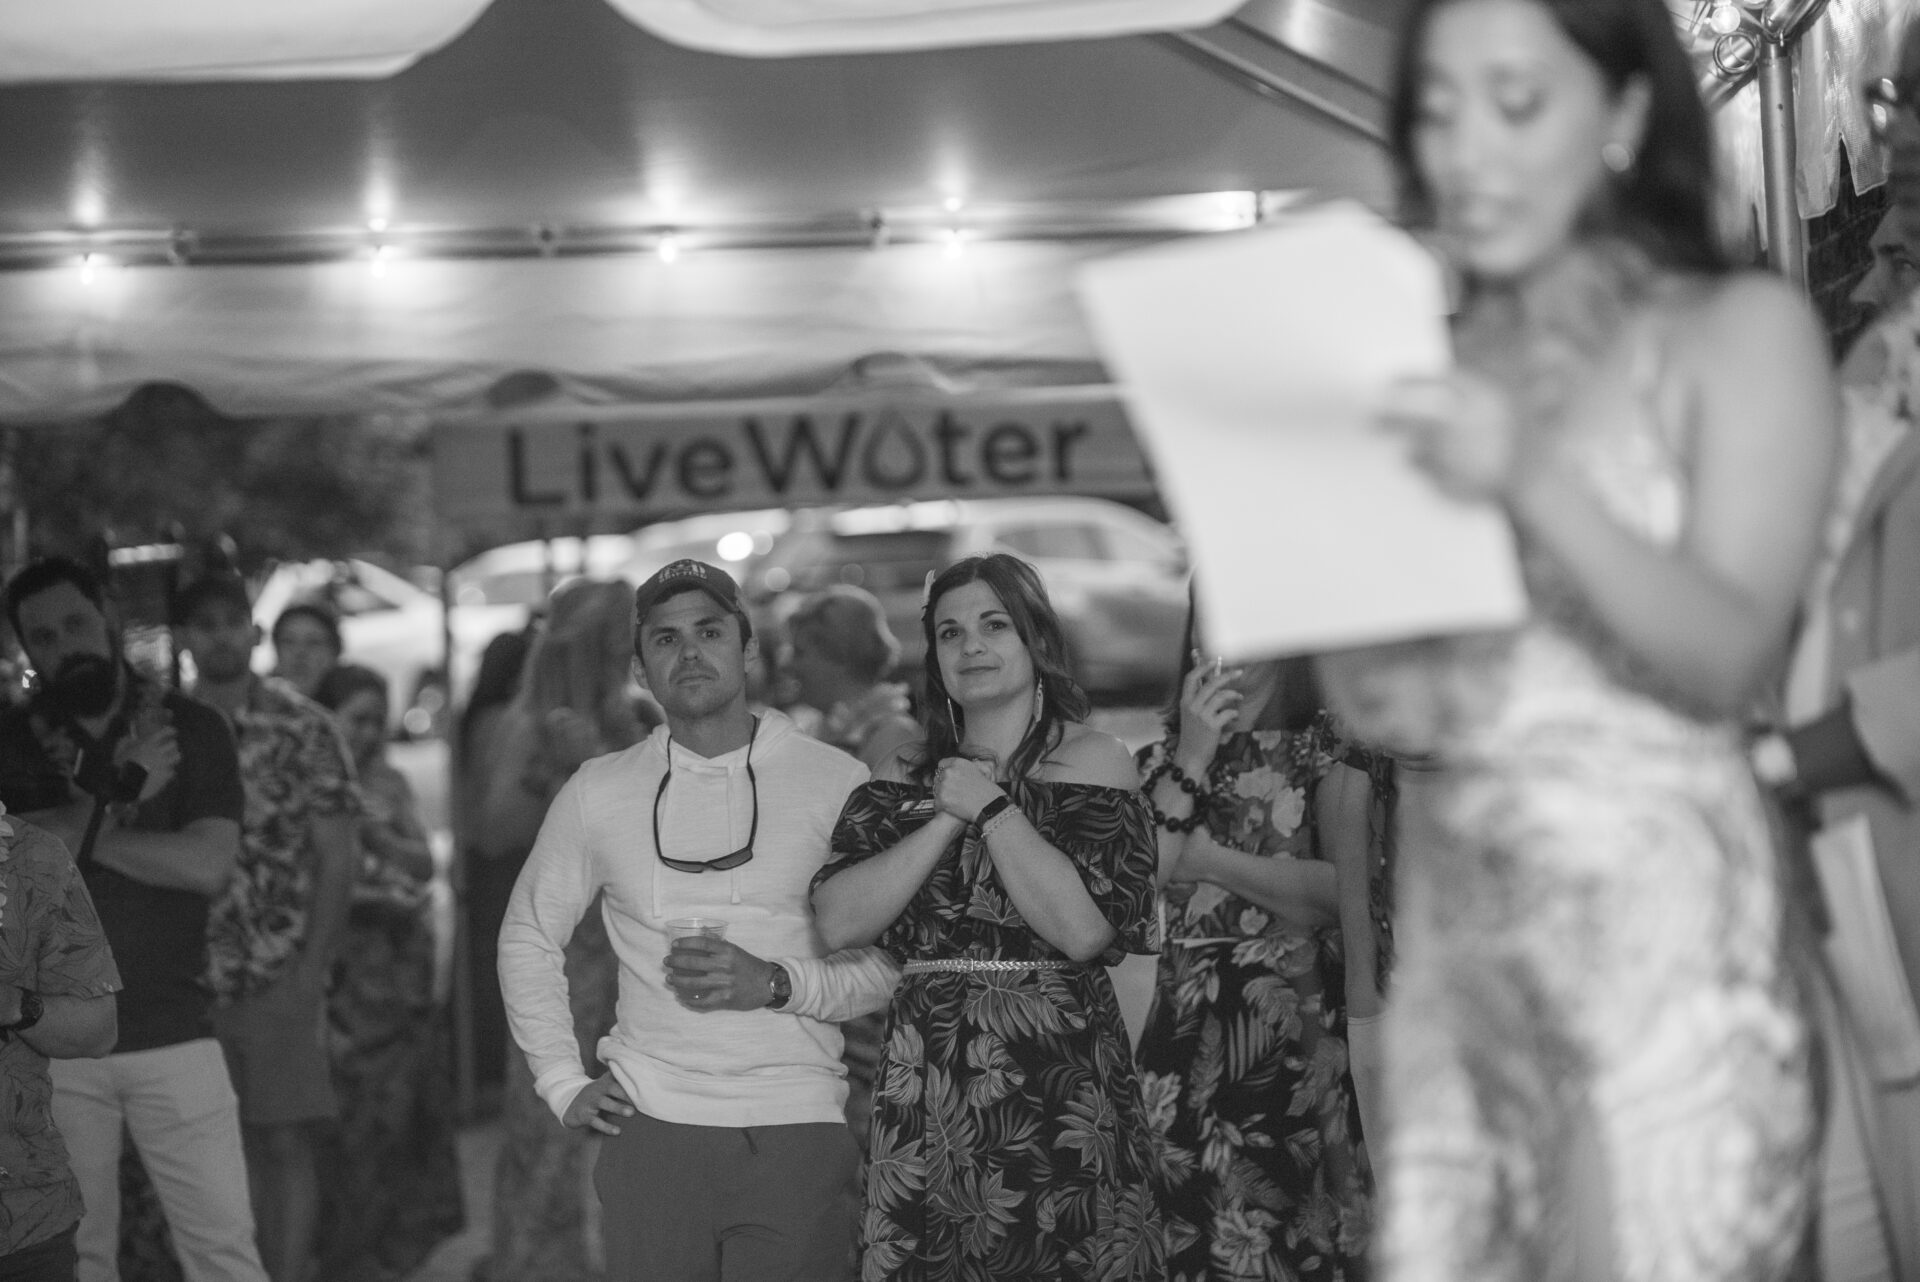 Gaby stands on stage in front of a crowd at the Live Water Luau. She is speaking into a microphone and looking down at her speech notes; three onlookers in the foreground are visibly moved. The photo is in black and white.